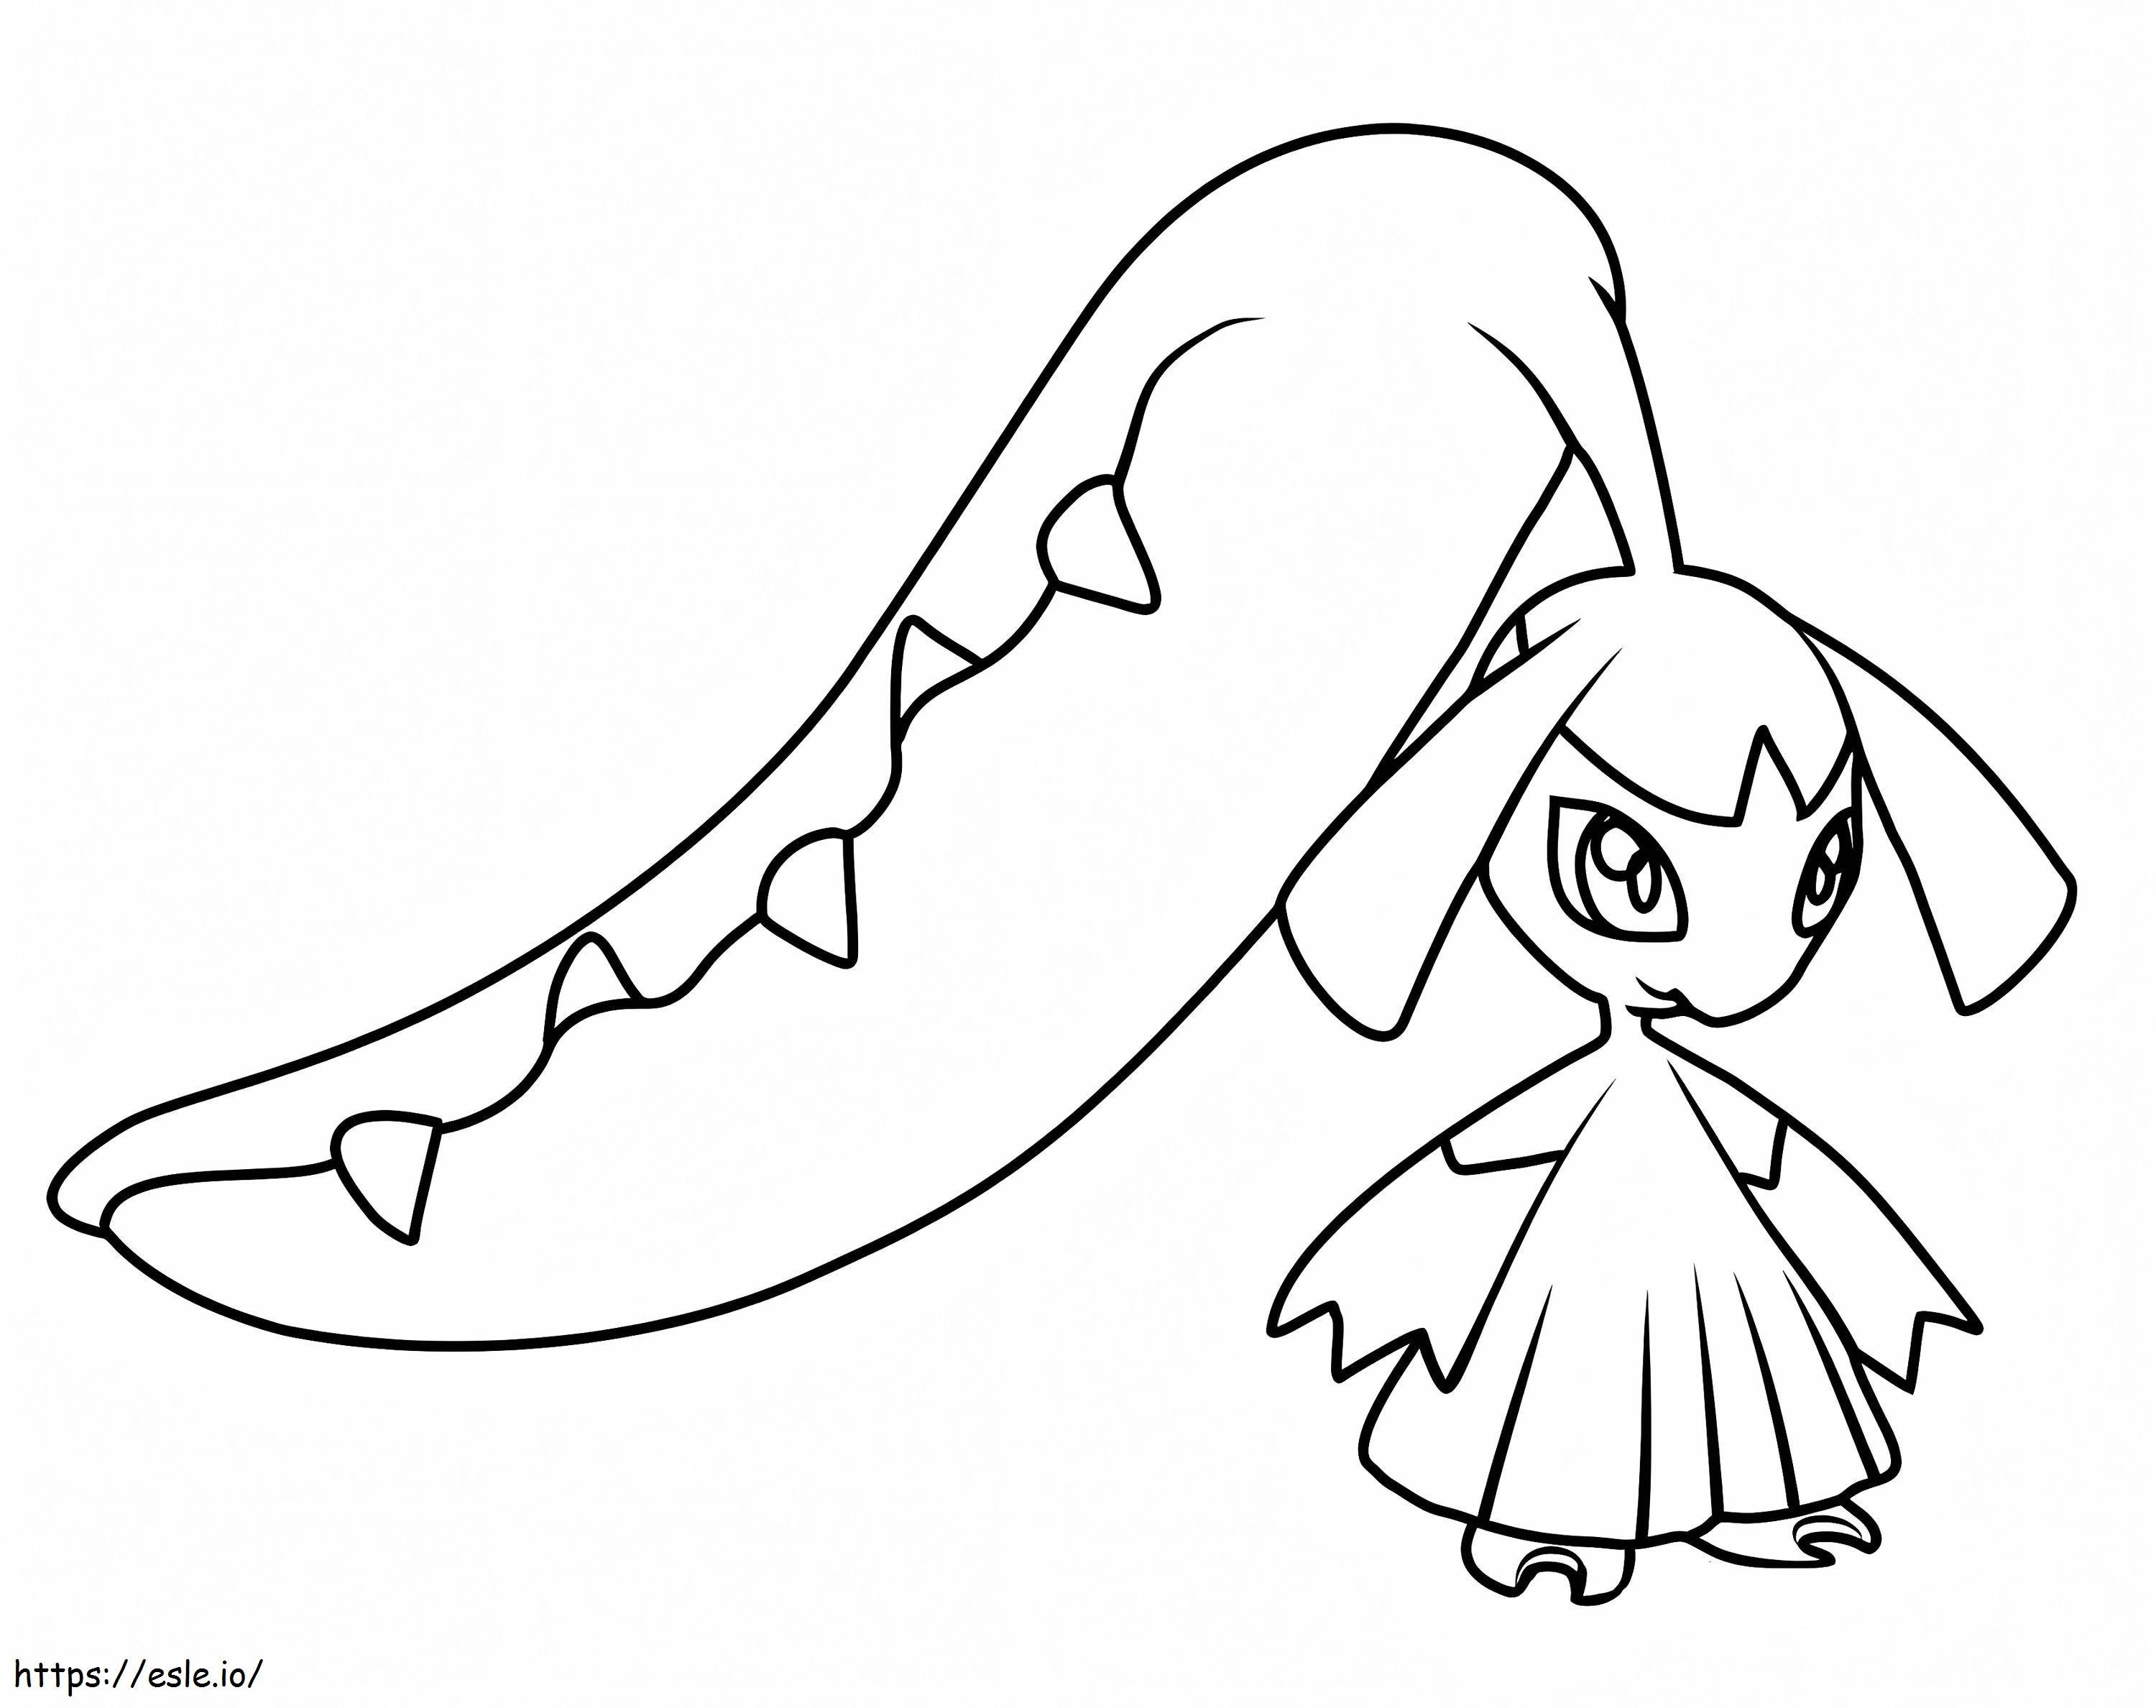 Mawile Pokemon 2 coloring page